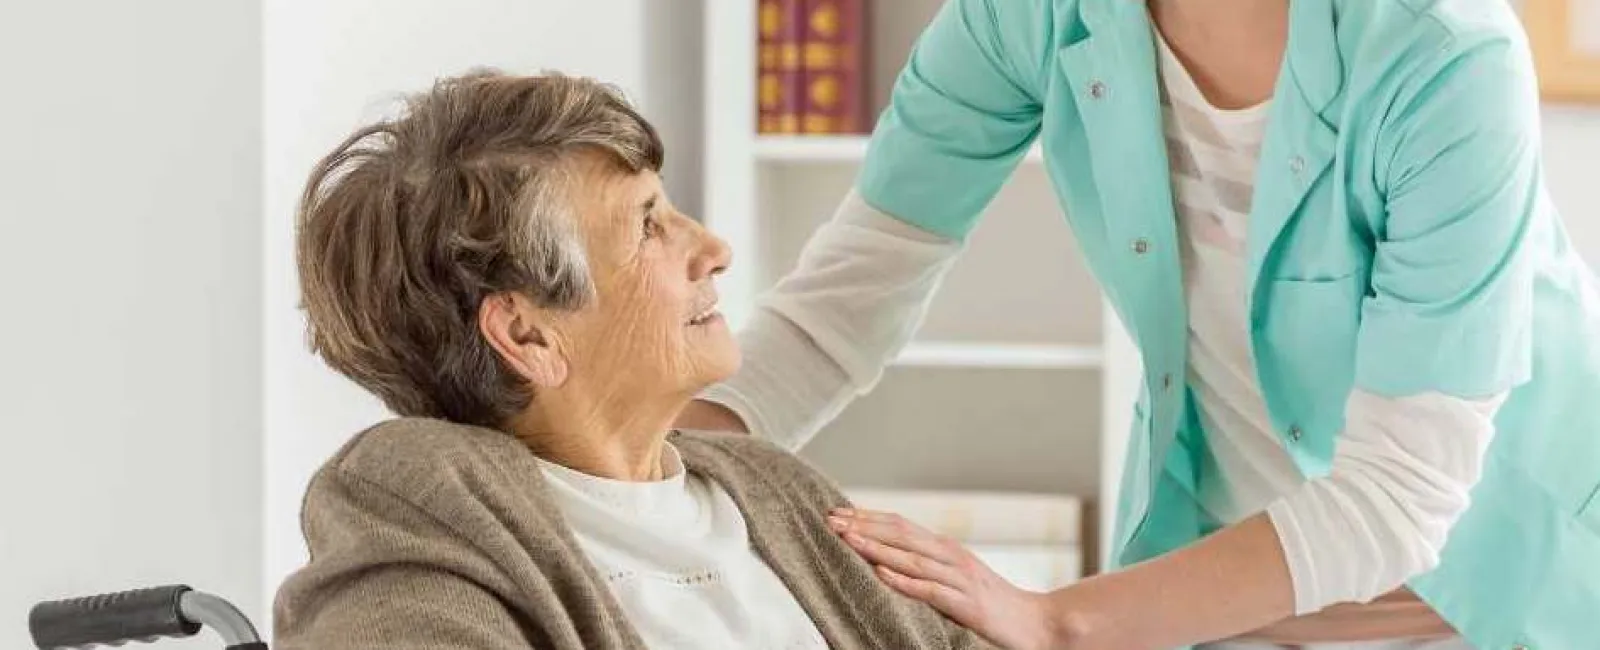 Is Senior Care Worth It? The Costs & Benefits To Consider